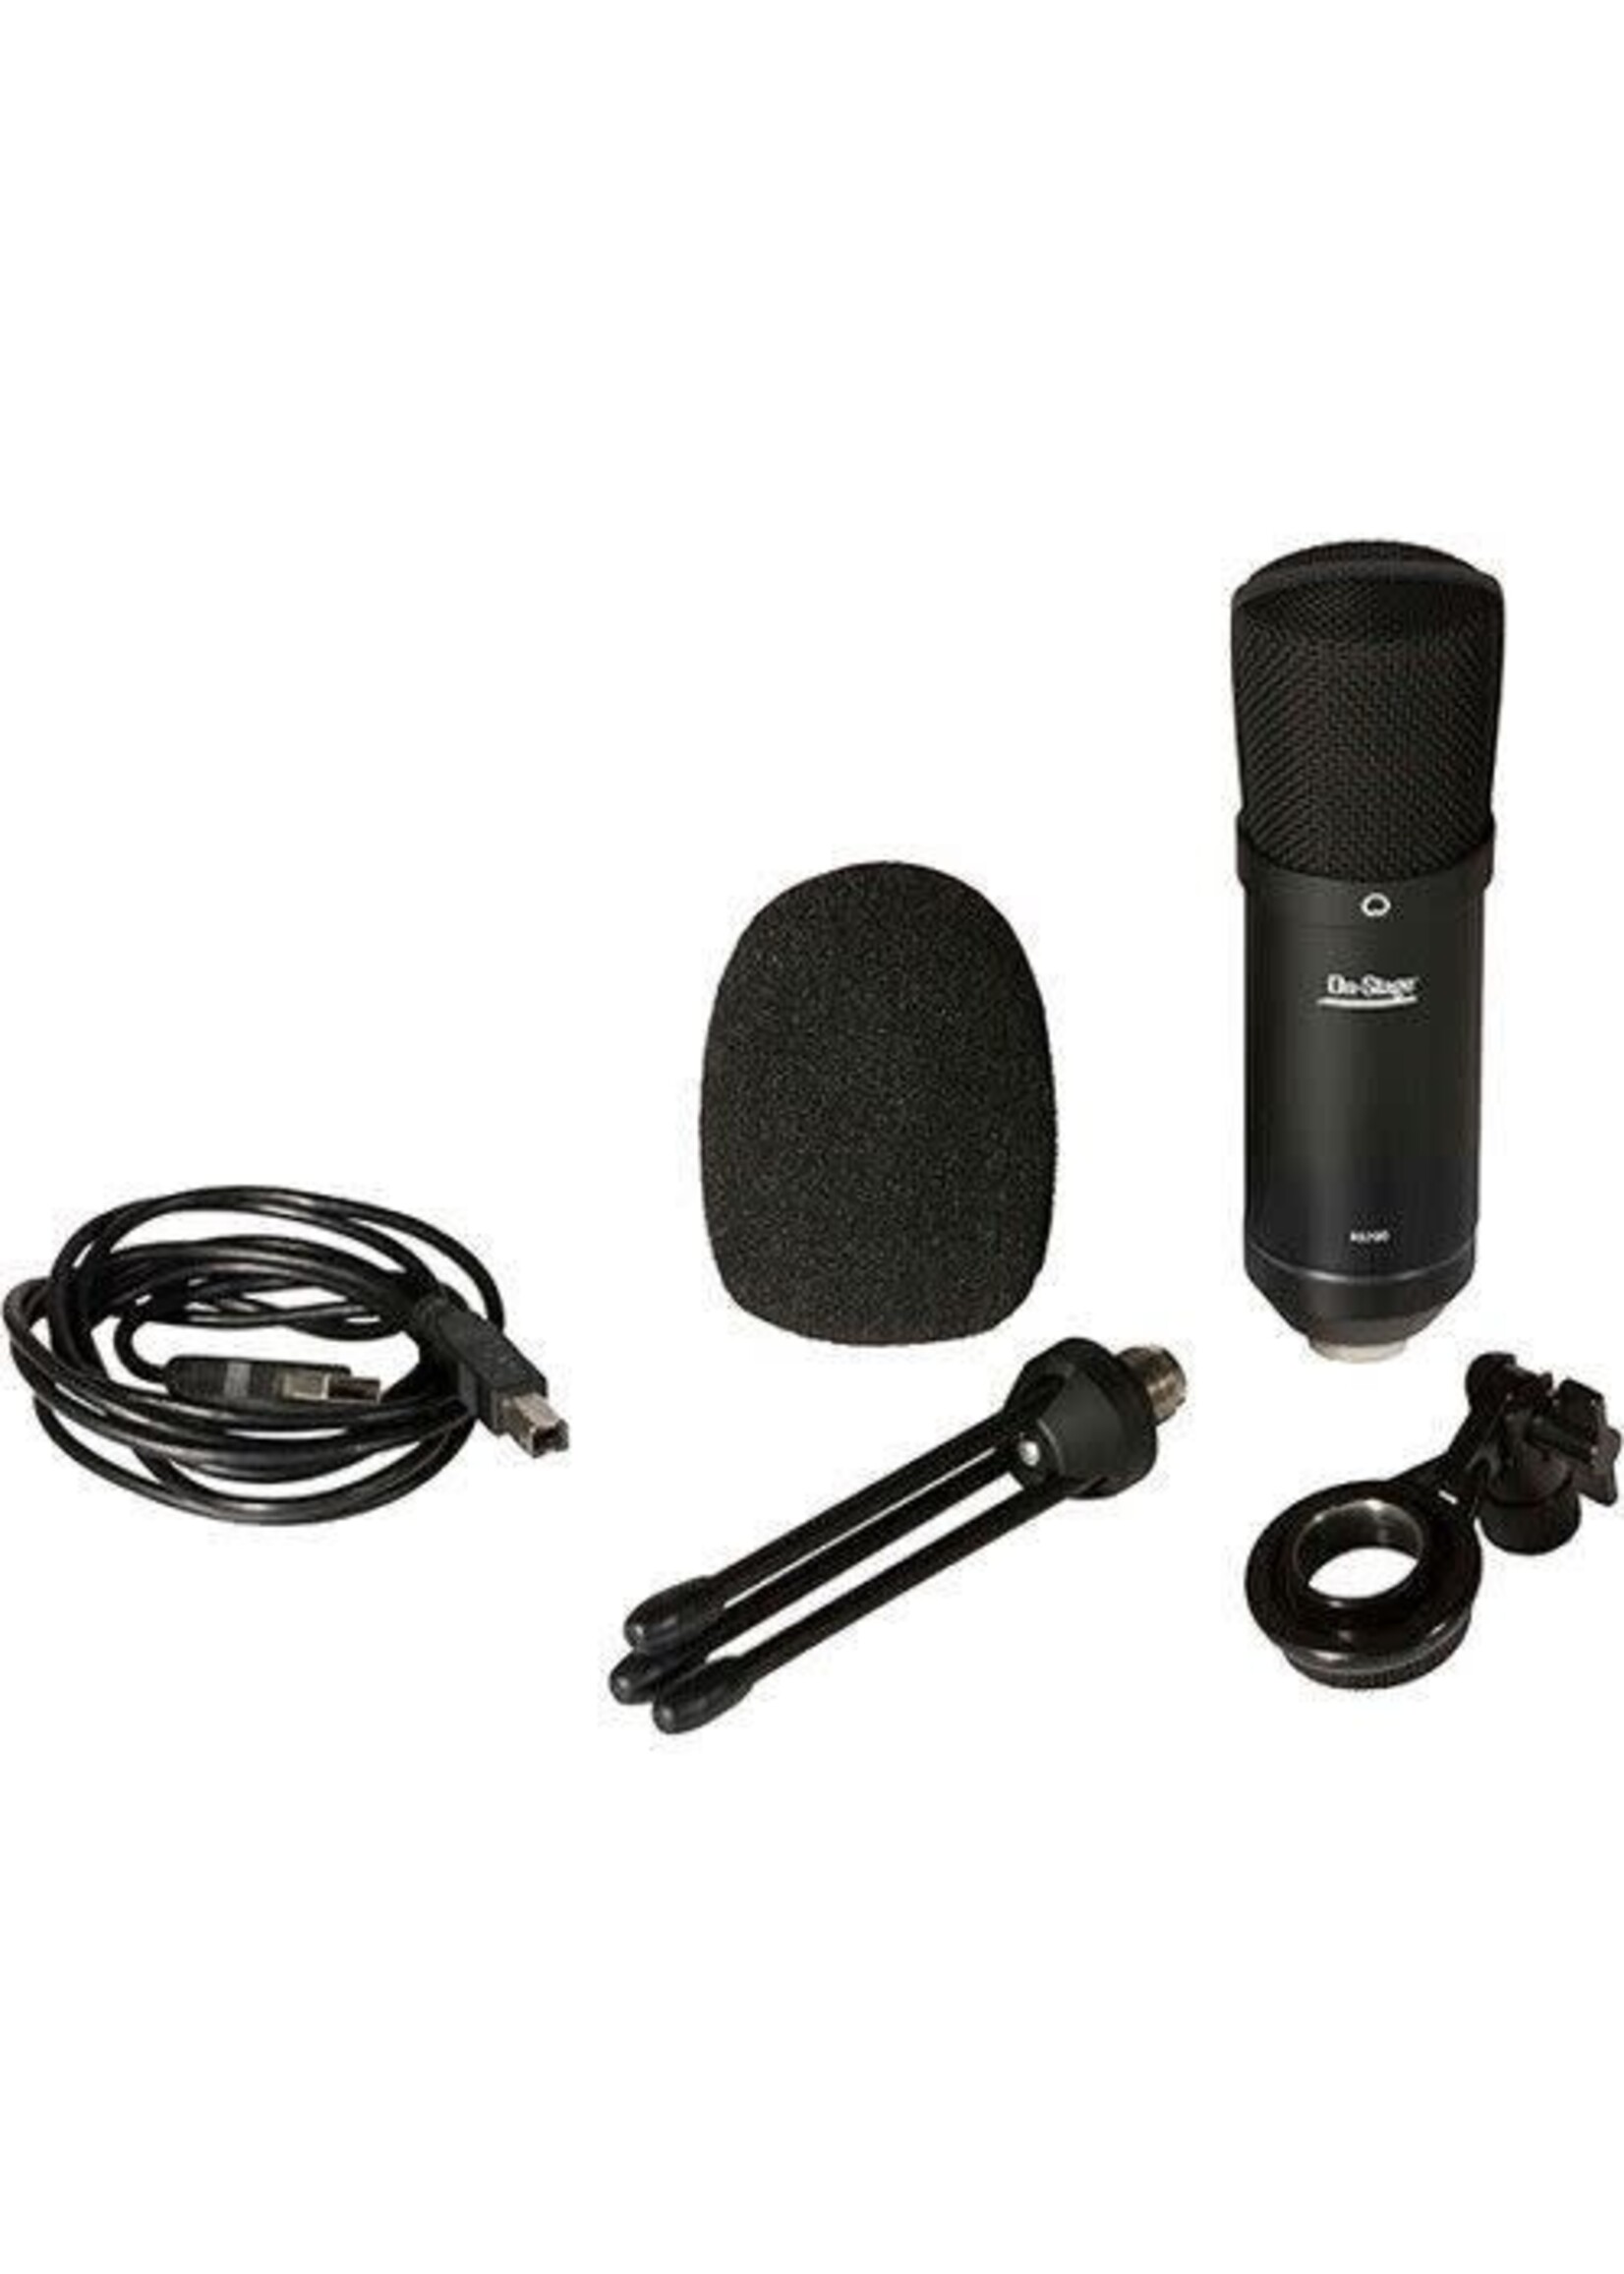 ON STAGE STANDS ON STAGE AUDIO  AS700 USB MICROPHONE PACKAGE w/FREE SHIPPING